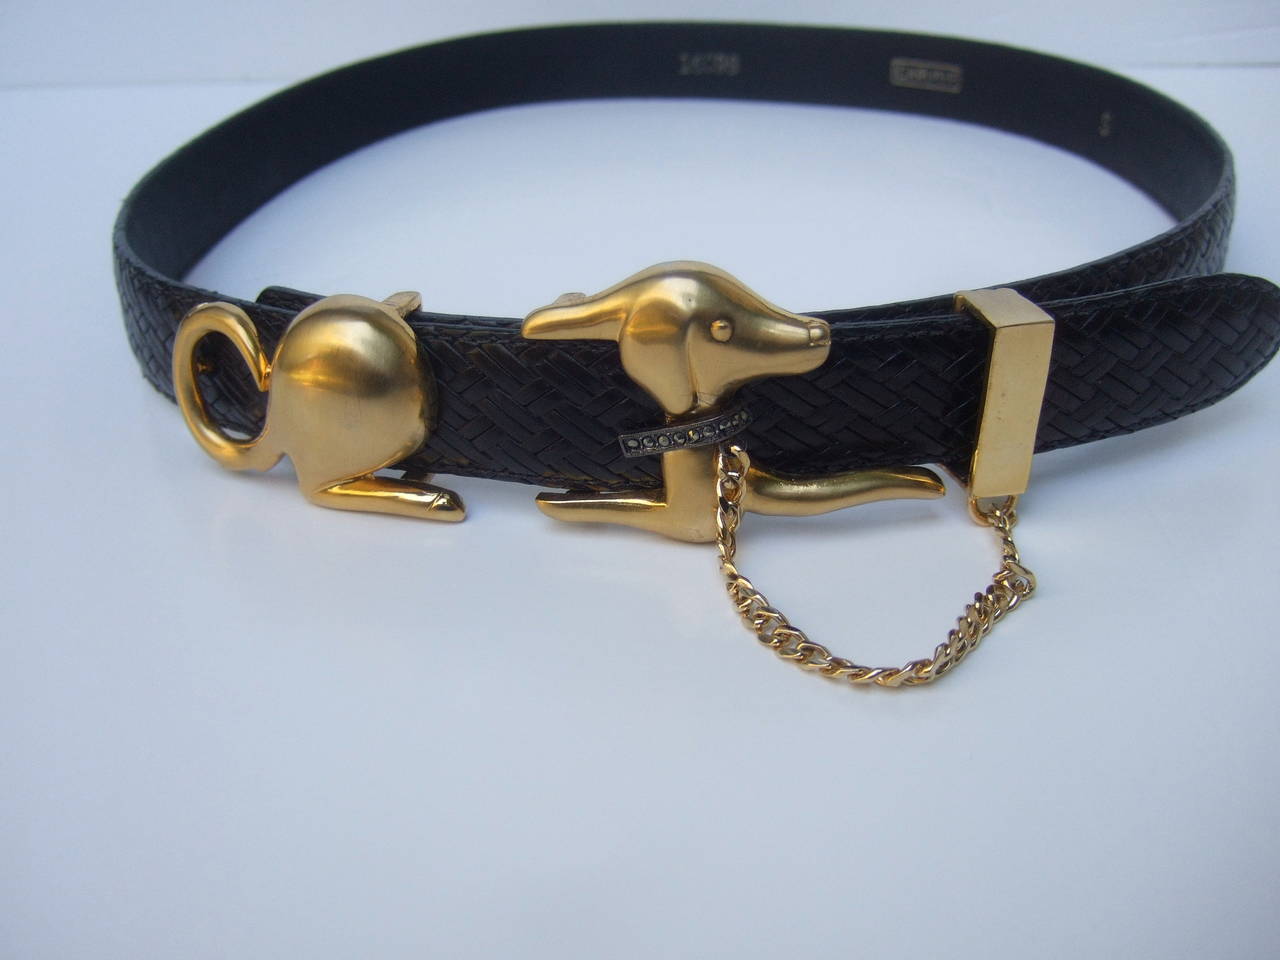 Stylish unique canine buckle black leather belt designed by Carlise 
The chic belt is designed with a matte gilt metal buckle with a dog
The dog has a subtle glittering marcasite collar & leash chain that hangs 
from the black leather belt

The